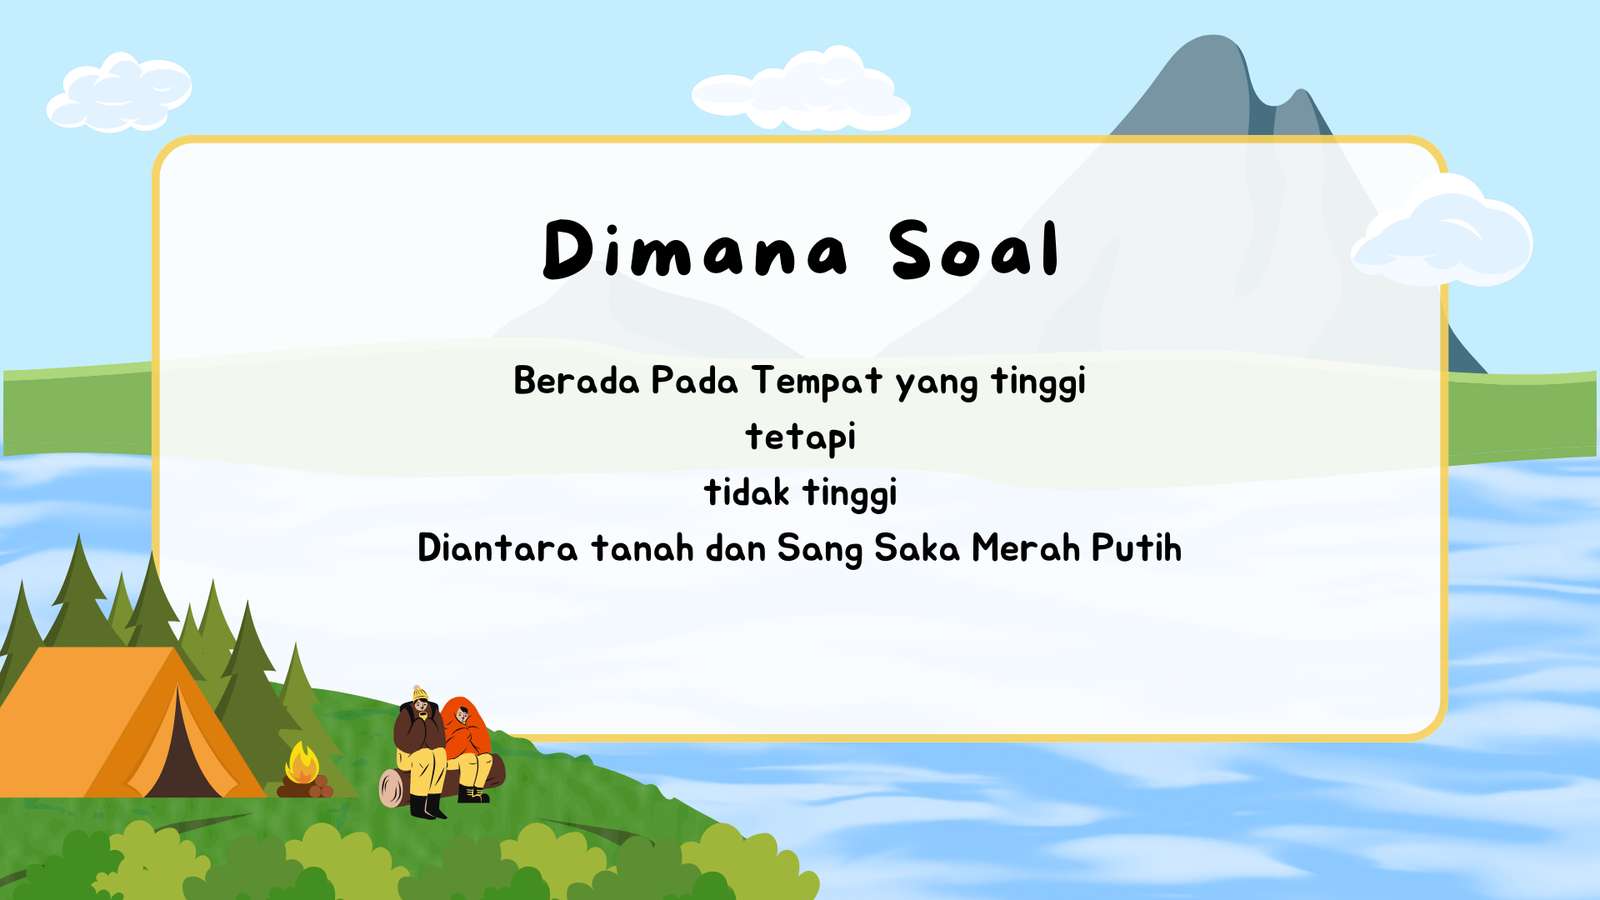 Dimana soal puzzle online from photo